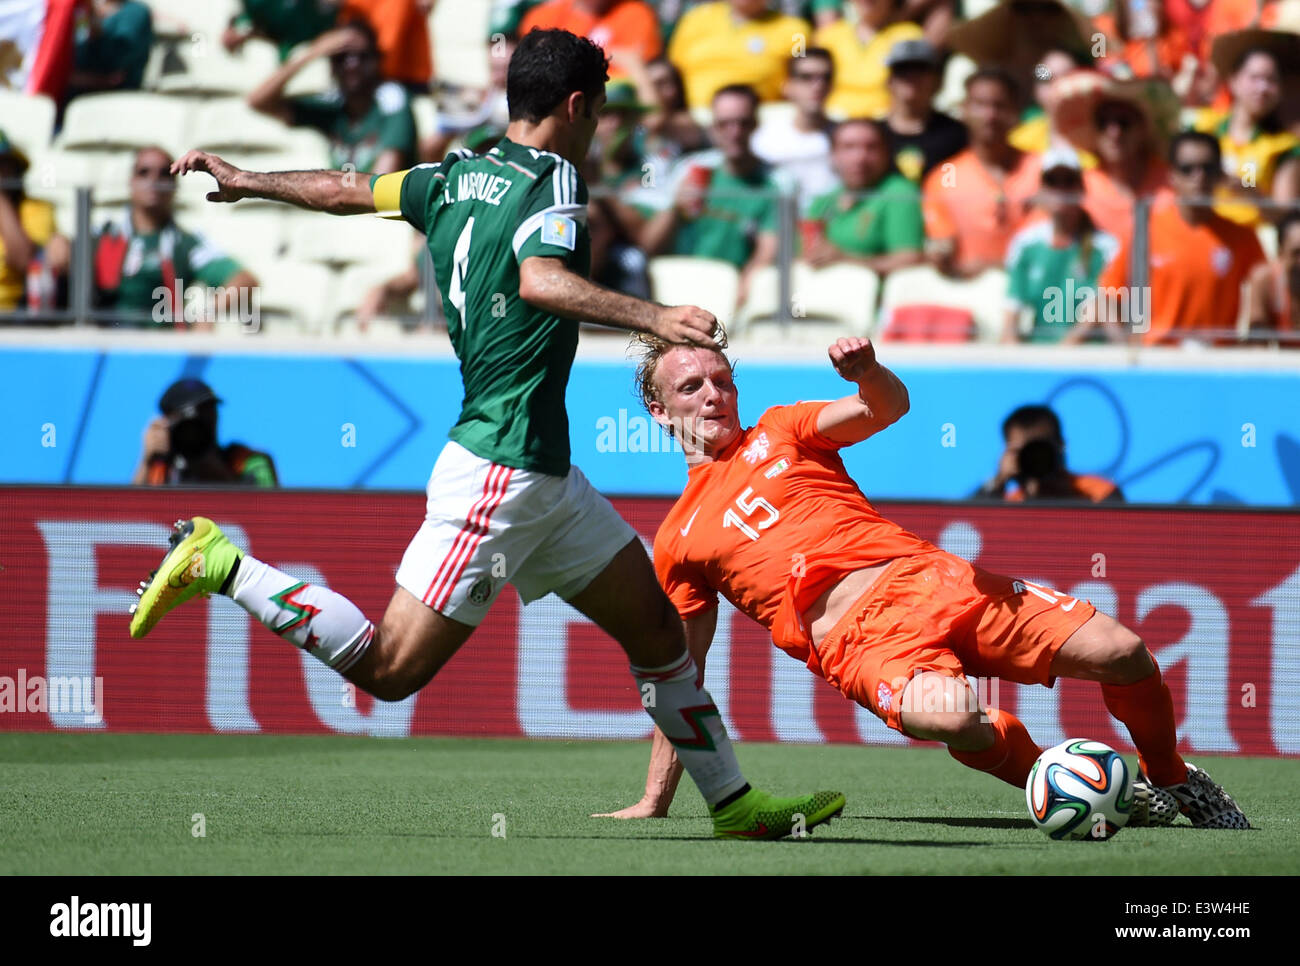 Fortaleza, Brazil. 29th June, 2014. Netherlands's Dirk Kuyt (R) vies with Mexico's Rafael Marquez during a Round of 16 match between Netherlands and Mexico of 2014 FIFA World Cup at the Estadio Castelao Stadium in Fortaleza, Brazil, on June 29, 2014. Credit:  Li Ga/Xinhua/Alamy Live News Stock Photo